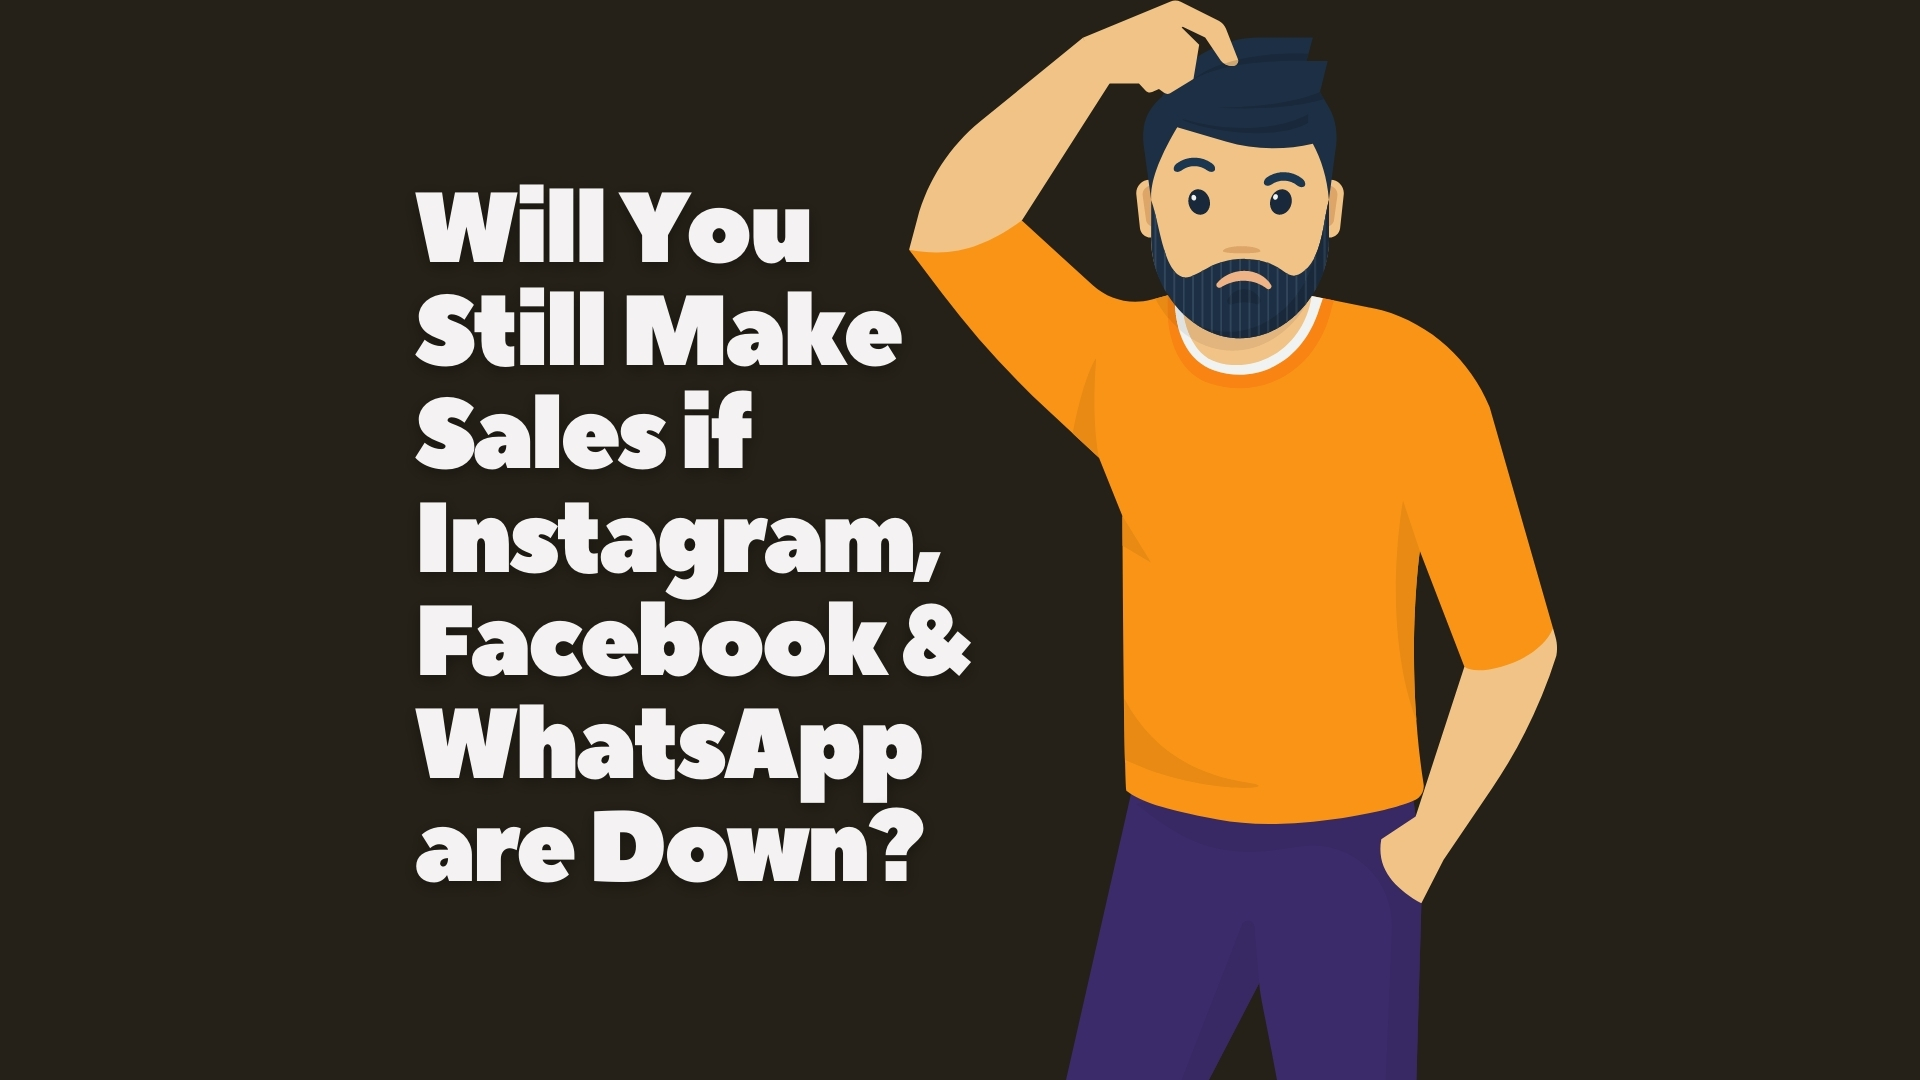 Will You Still Make Sales if Instagram, Facebook & WhatsApp are Down